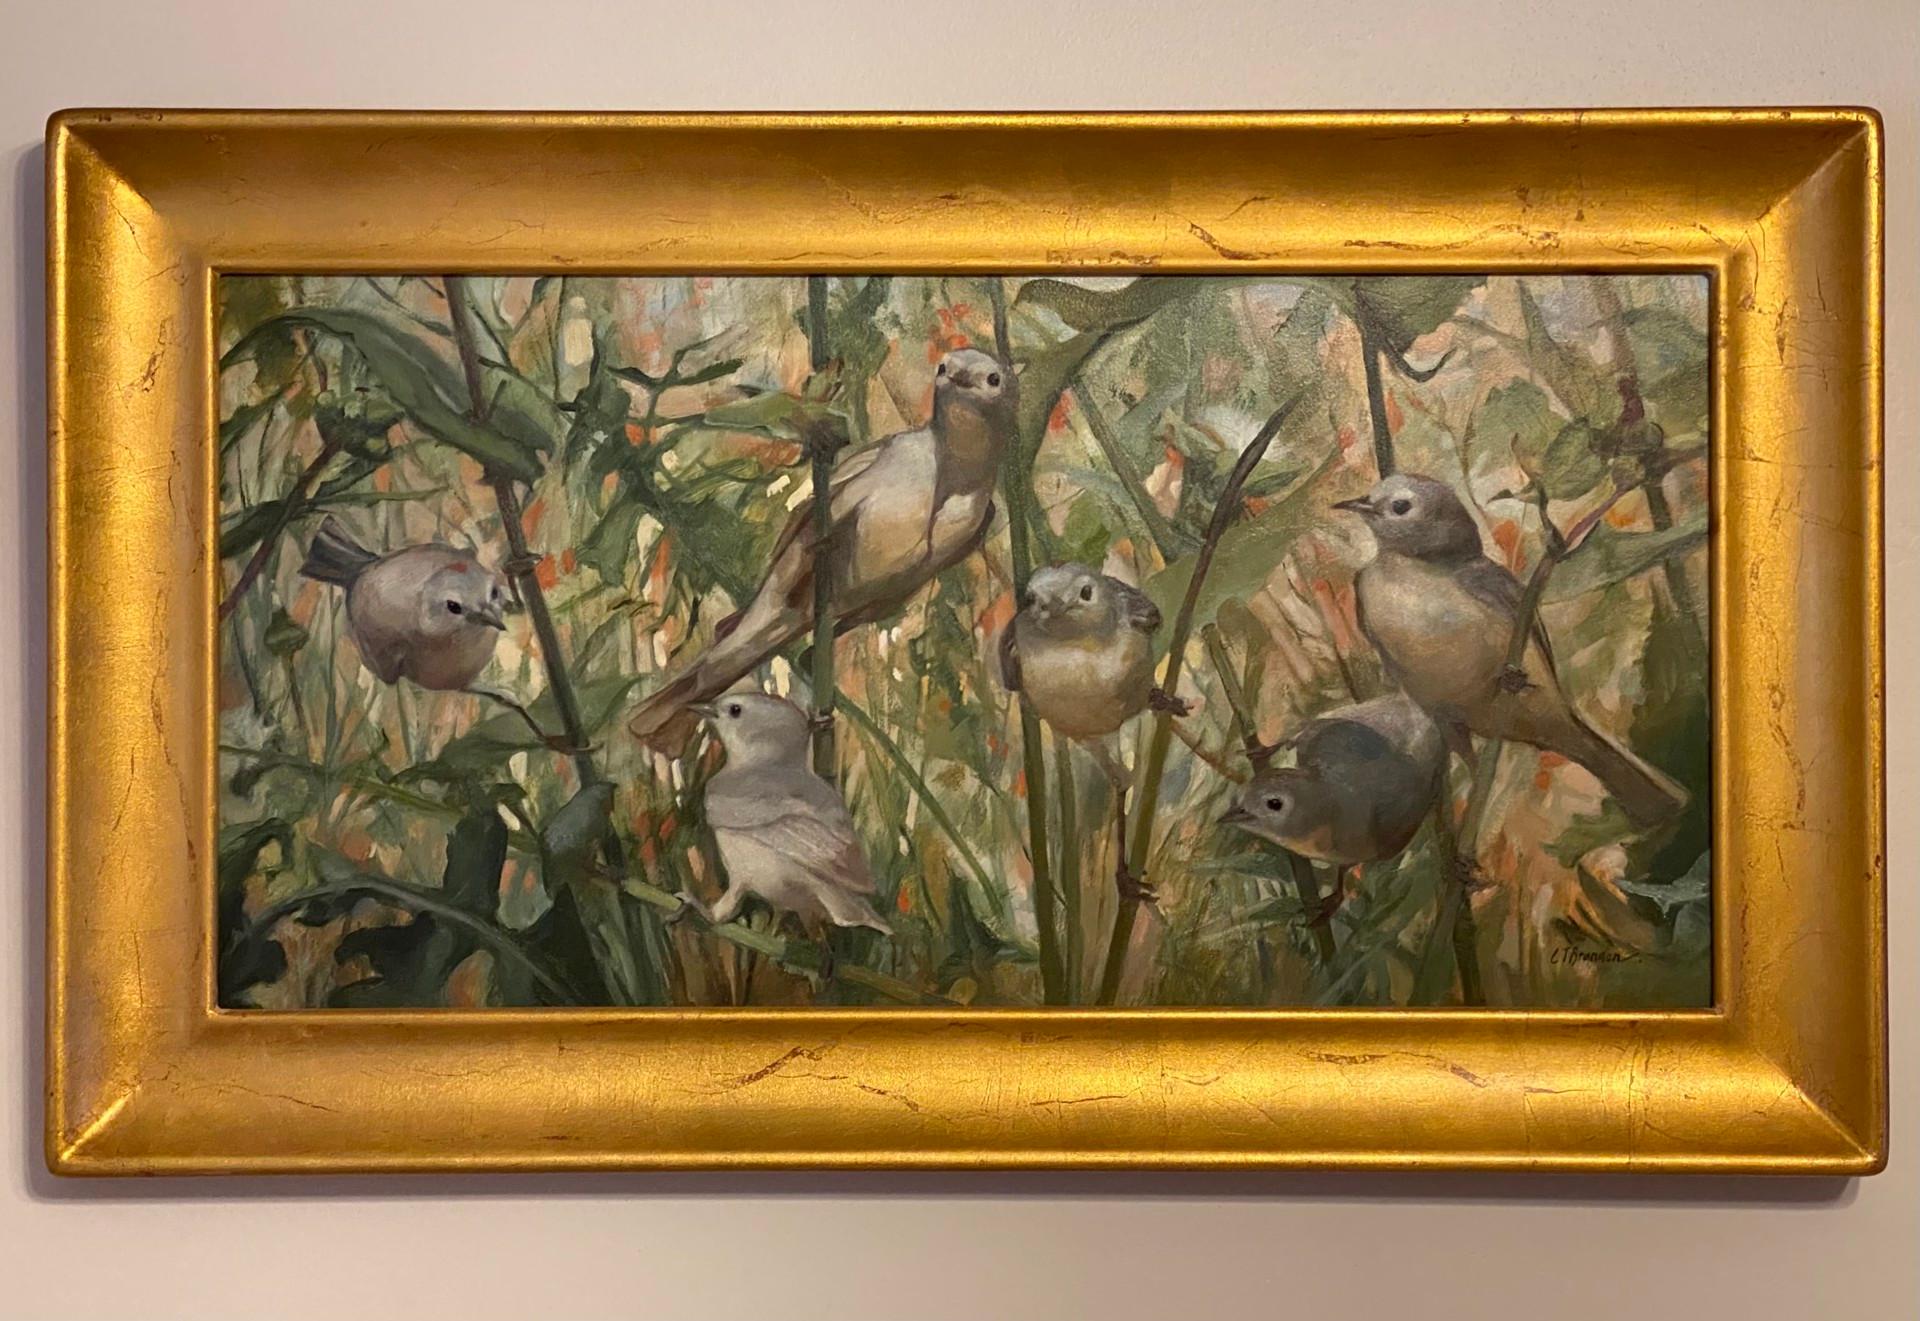 Lucy's Warblers in the Weeds - Painting by Linda Tracey Brandon